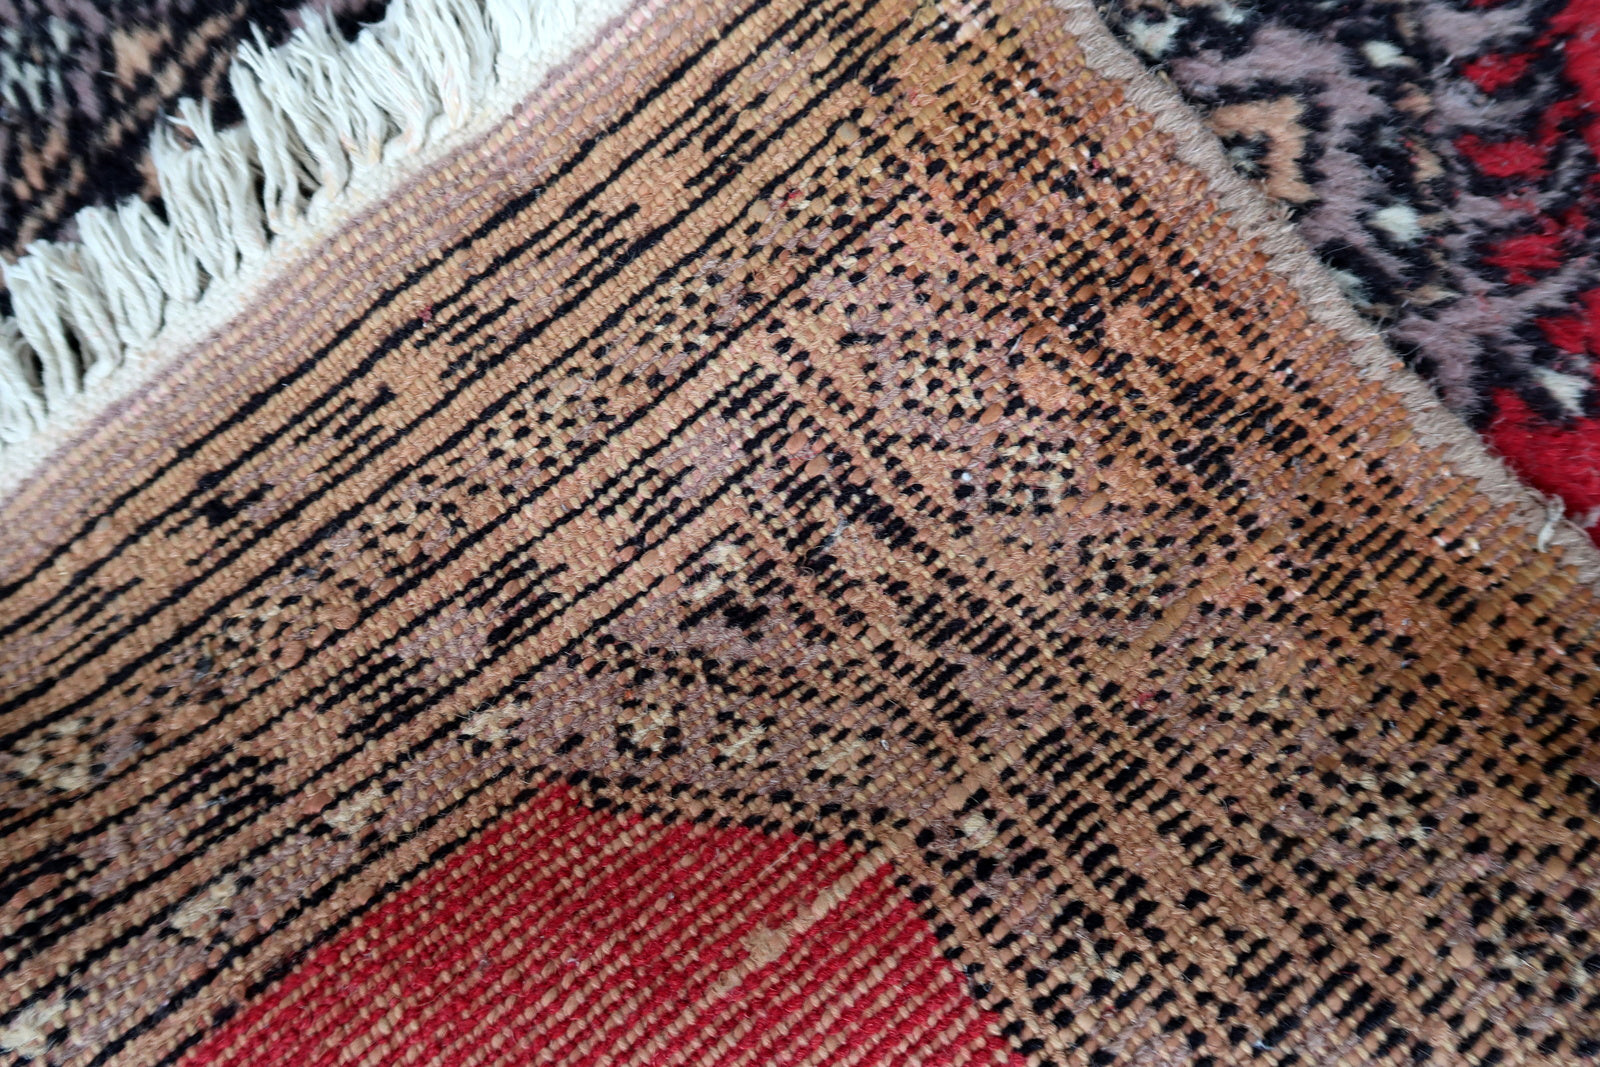 Handmade vintage Uzbek Bukhara rug in traditional design. The rug is from the end of 20th century, it is in original condition, has some signs of age.